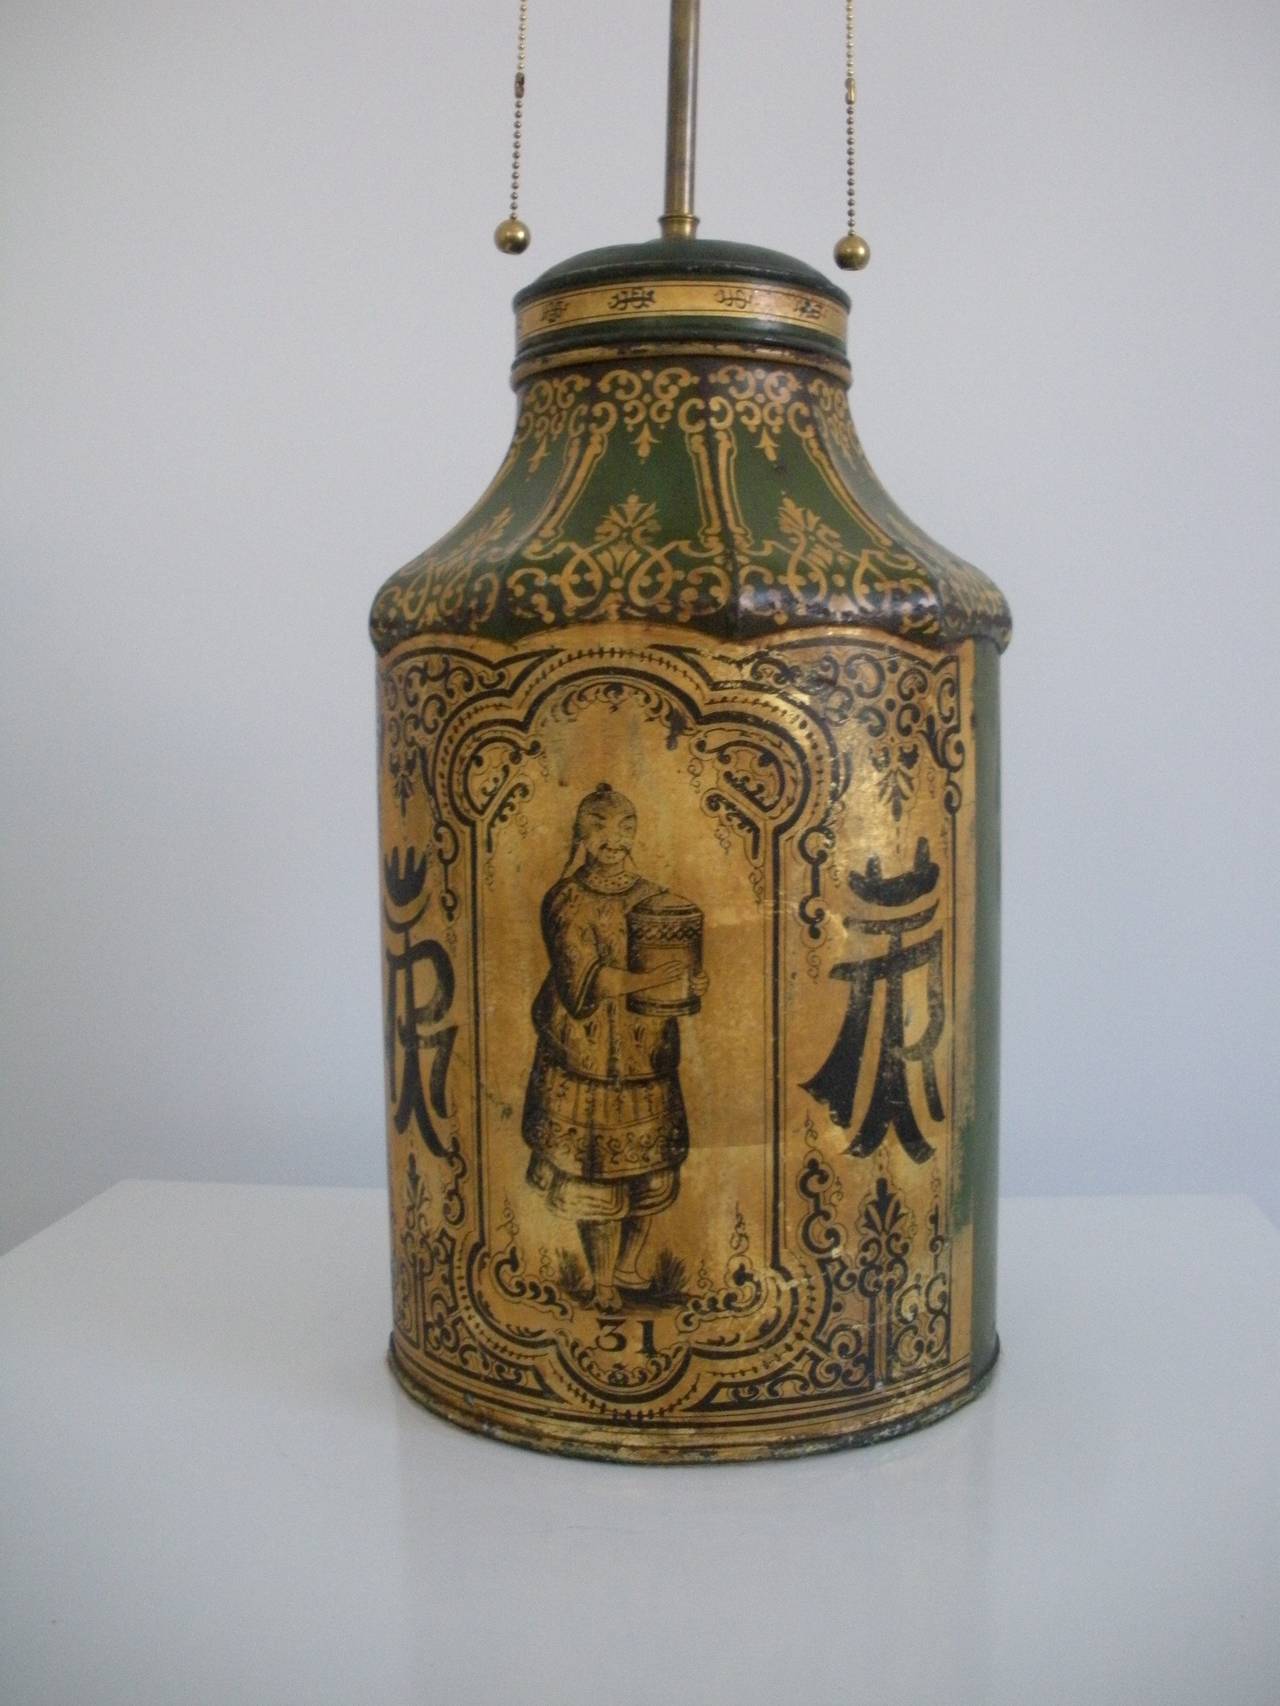 Antique Chinese tea jar converted to a lamp.
Semi circular with flat back and gold and black detailing with original patina and finish.